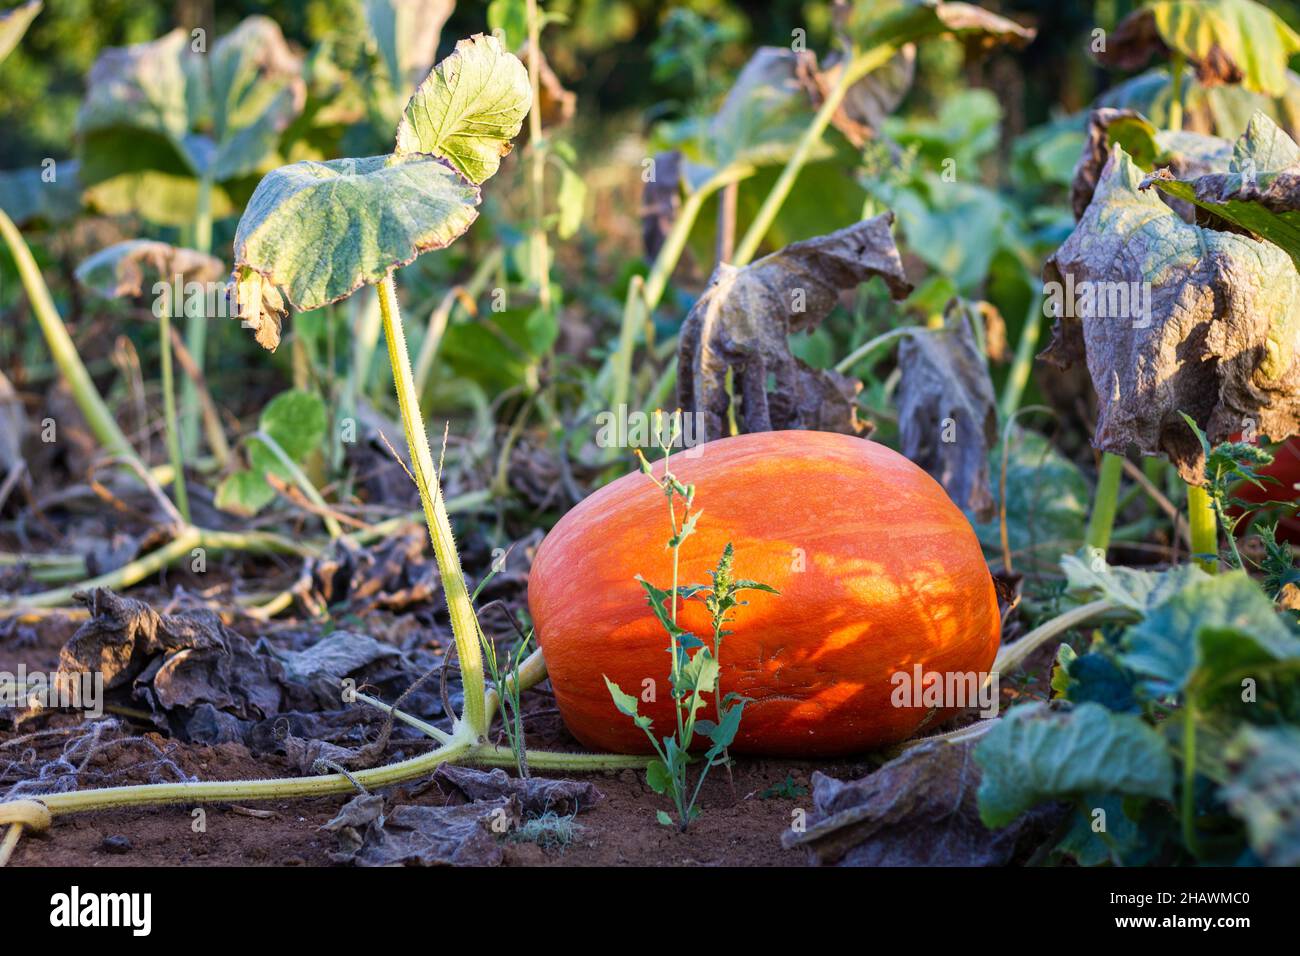 Pumpkin at agricultural field is ready for harvest. Big orange pumpkins growing in vegetable garden at organic farm Stock Photo